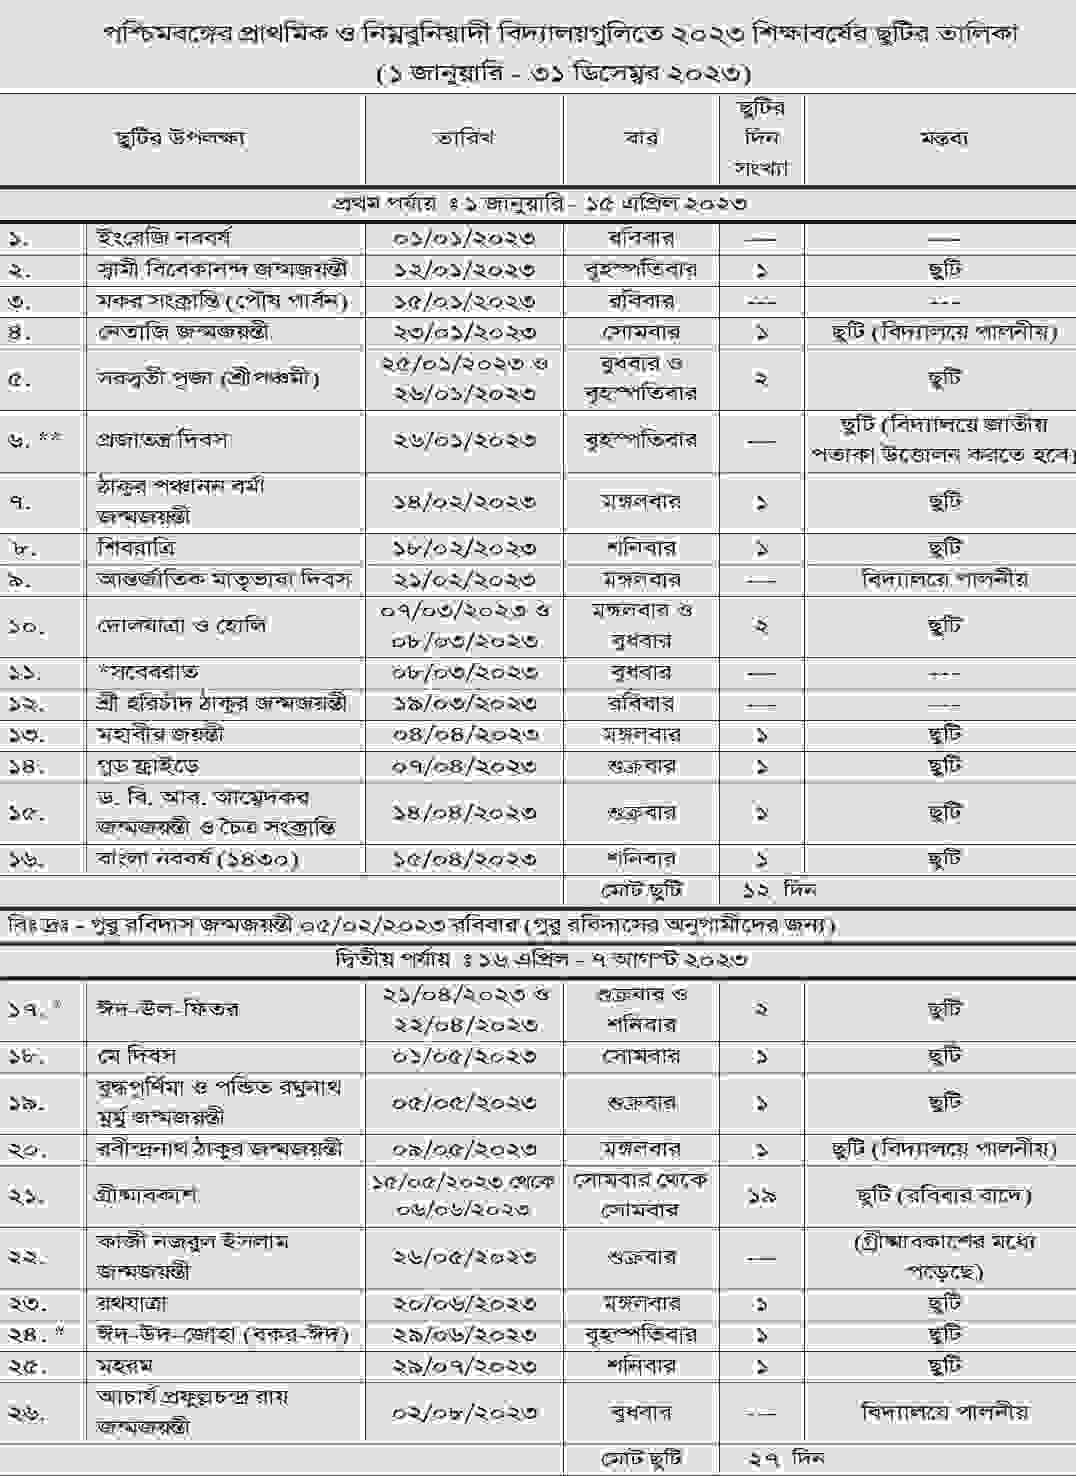 pdf-wb-primary-school-holiday-list-2023-west-bengal-primary-school-holiday-list-2023-very-big